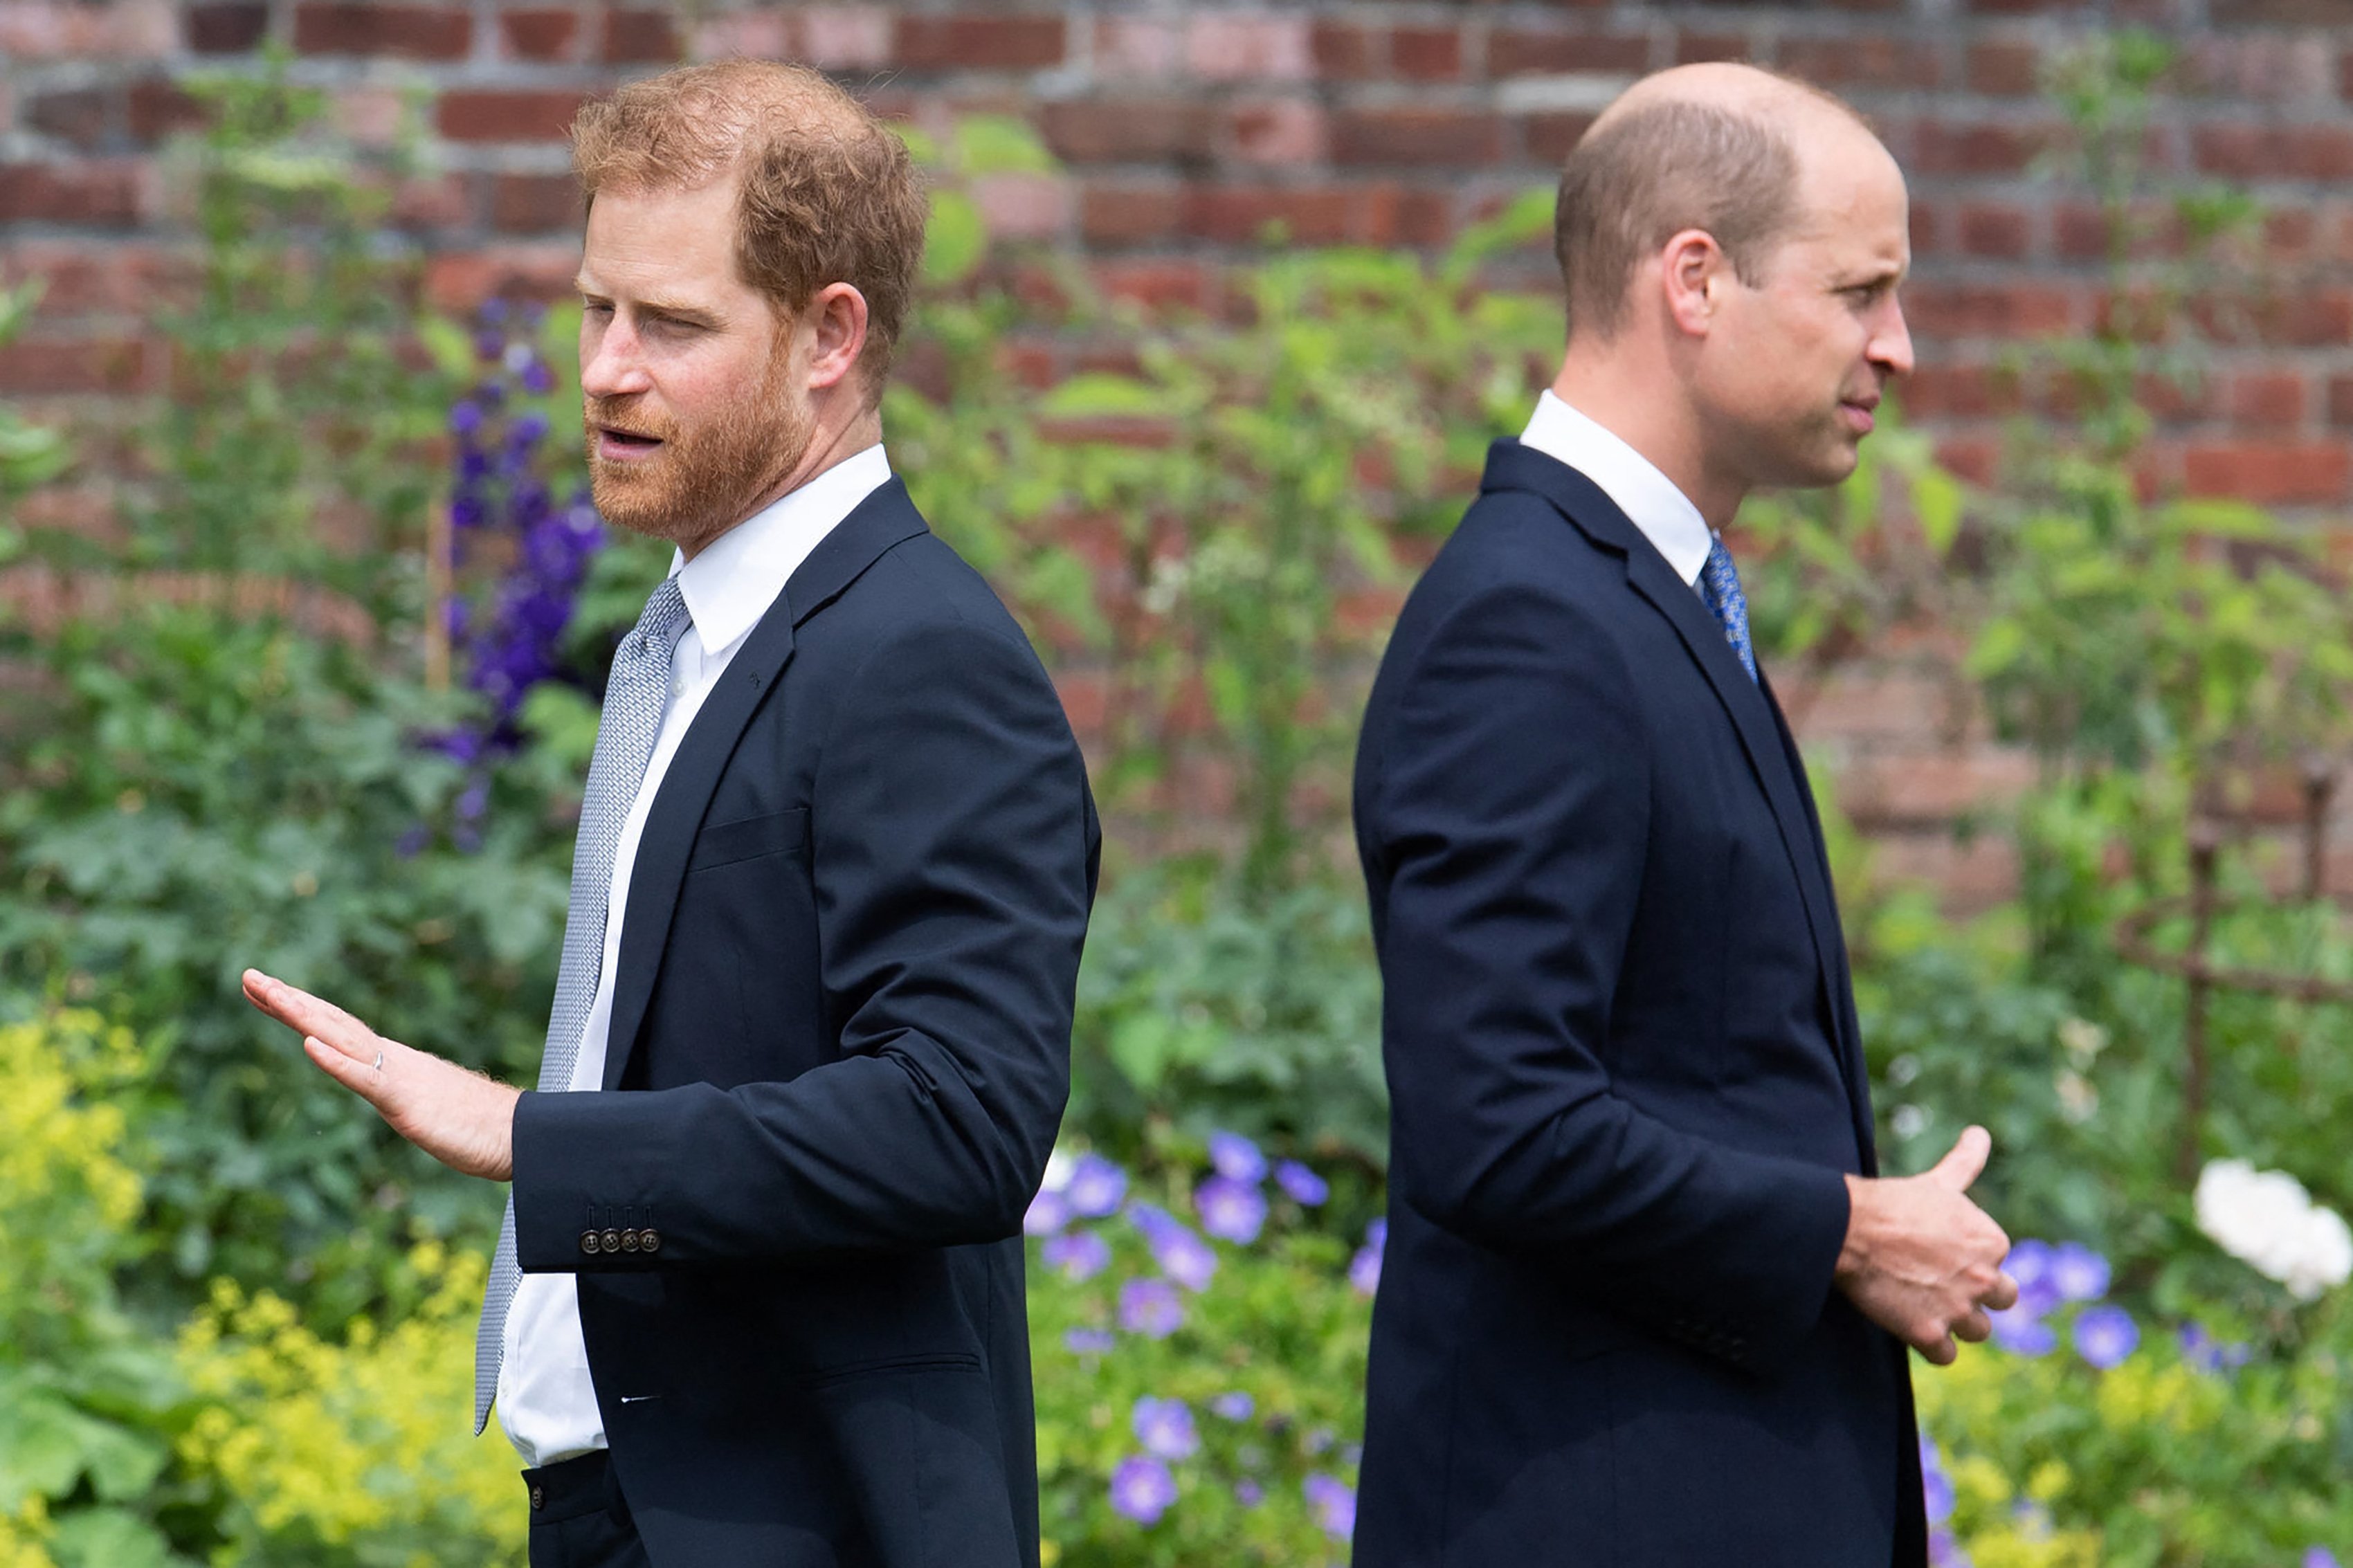 Prince Harry, Duke of Sussex and his brother Prince William, Duke of Cambridge during the unveiling of a statue of their mother, Princess Diana at The Sunken Garden on July 1, 2021 in Kensington Palace, London. / Source: Getty Images